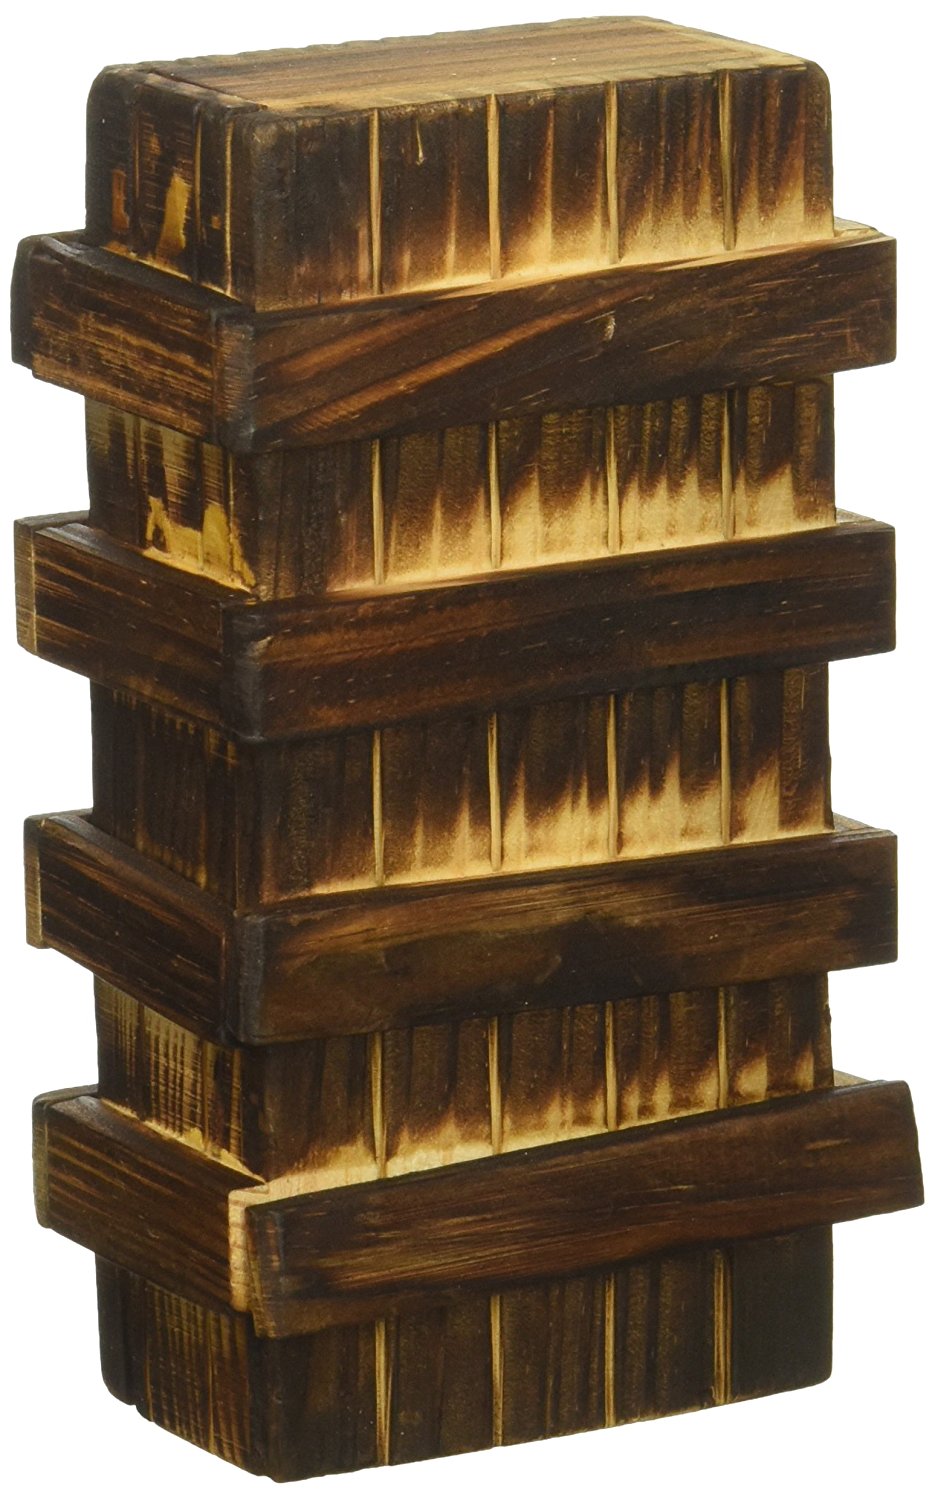 This three sided Y&Y Star Kongming wooden box puzzle has a secret compartment, if you can find it.   <br/><br/> You can pick this up at  <a href="https://amzn.to/2LsxTdx" target="_blank">Amazon for about $7.99</a>.